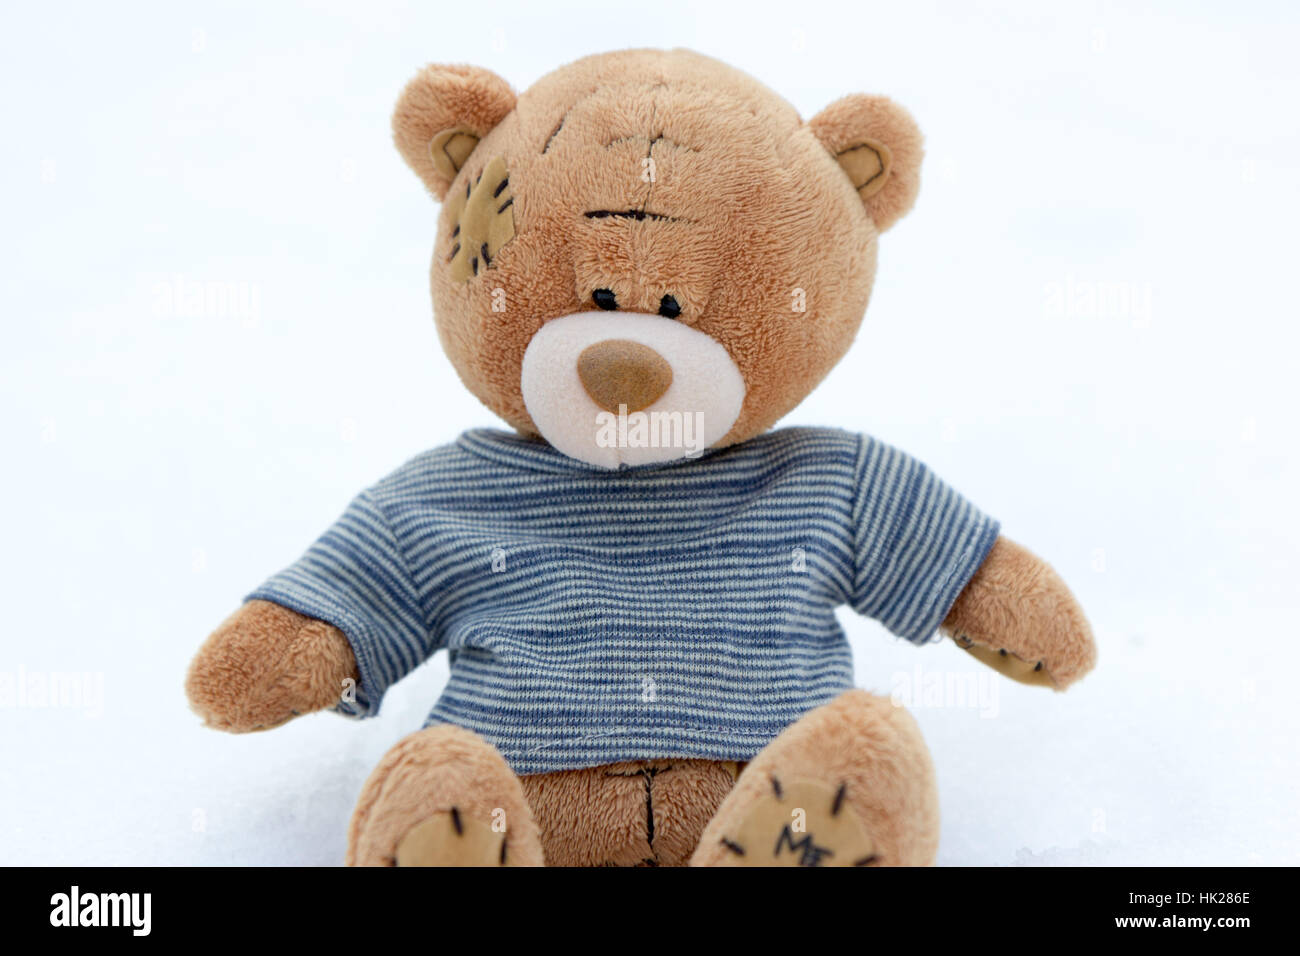 A cute brown teddy bear in snow with blue striped T-shirt and the words 'me to you' on its hind paw Stock Photo